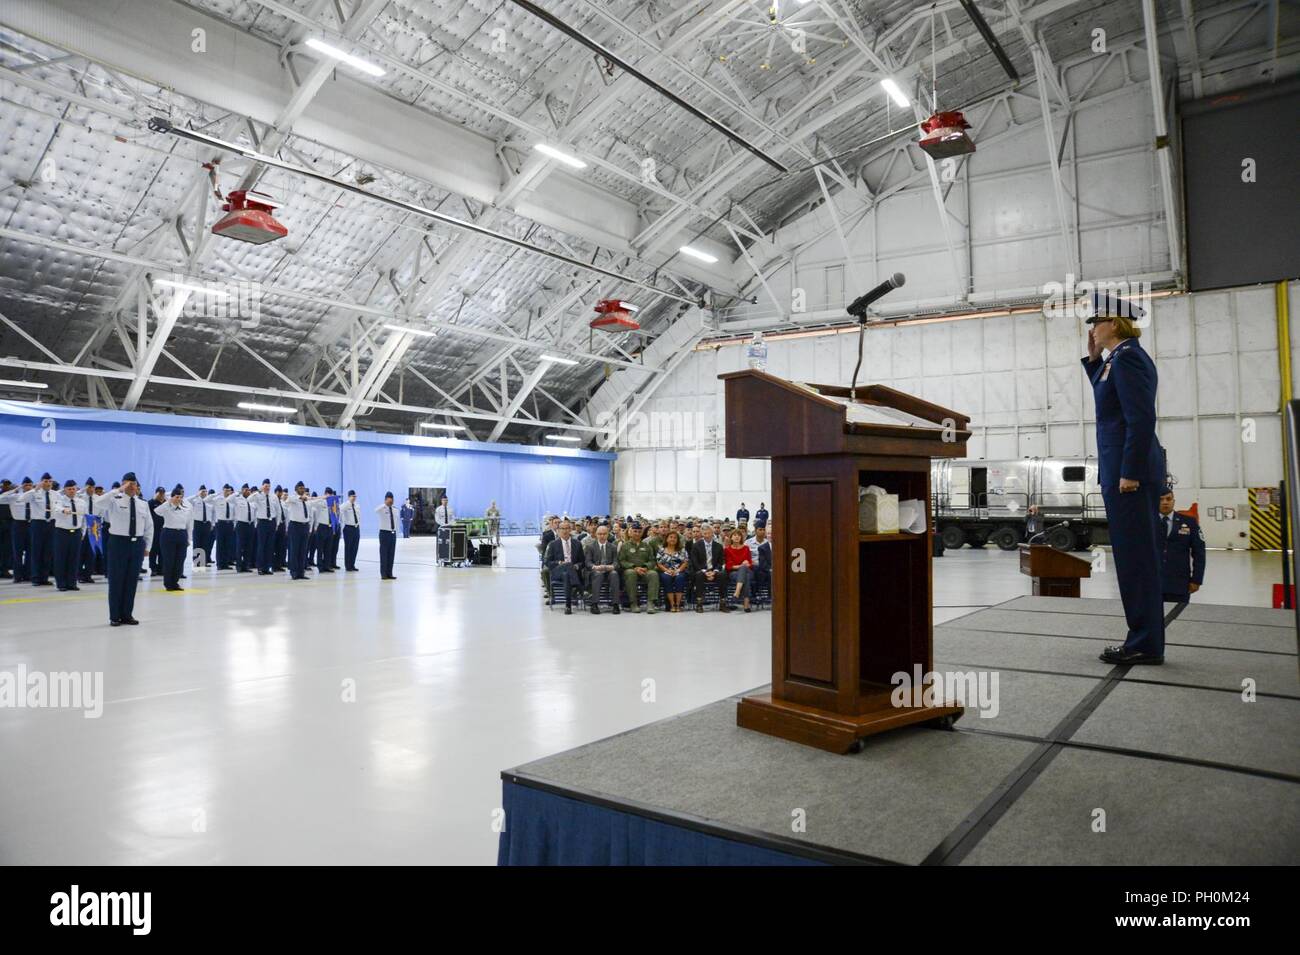 Col. Rebecca Sonkiss, 89th Airlift Wing commander receives her first salute from Airmen assigned to the 89th AW, June 15, 2018 during a change of command ceremony at Joint Base Andrews, Md. Sonkiss assumed command of the 89th AW from Col. Casey Eaton. Sonkiss is a command pilot with more than 4,200 hours in the T-37B, T-44, EC-130/H, RQ-1A/B, C-130J and C-17 aircraft. She has 24 years of active-duty service and arrived at JBA from Joint Base Lewis-McCord, Wash. where she was the 62nd Airlift Wing commander. Stock Photo